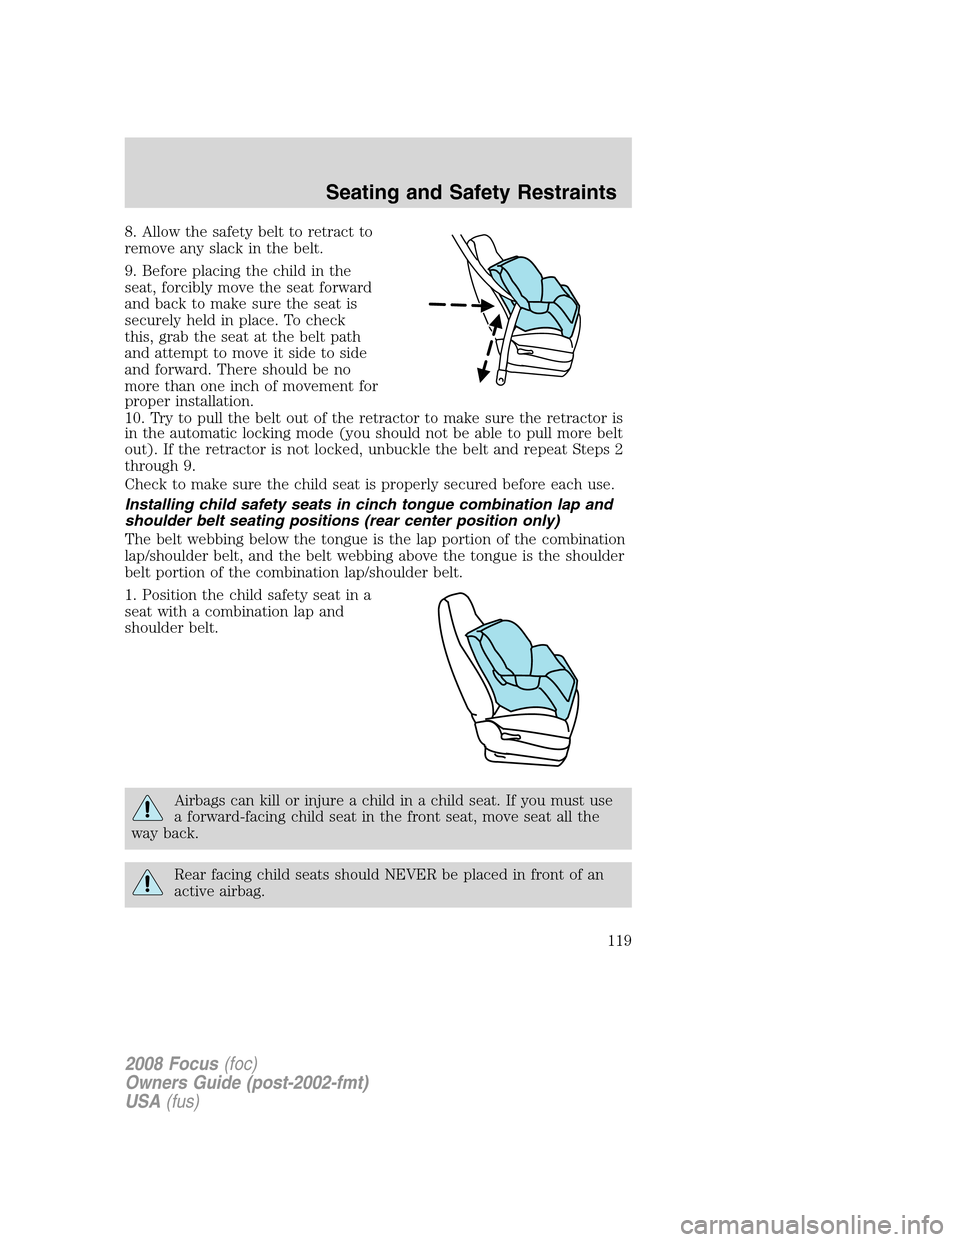 FORD FOCUS 2008 2.G Owners Manual 8. Allow the safety belt to retract to
remove any slack in the belt.
9. Before placing the child in the
seat, forcibly move the seat forward
and back to make sure the seat is
securely held in place. T